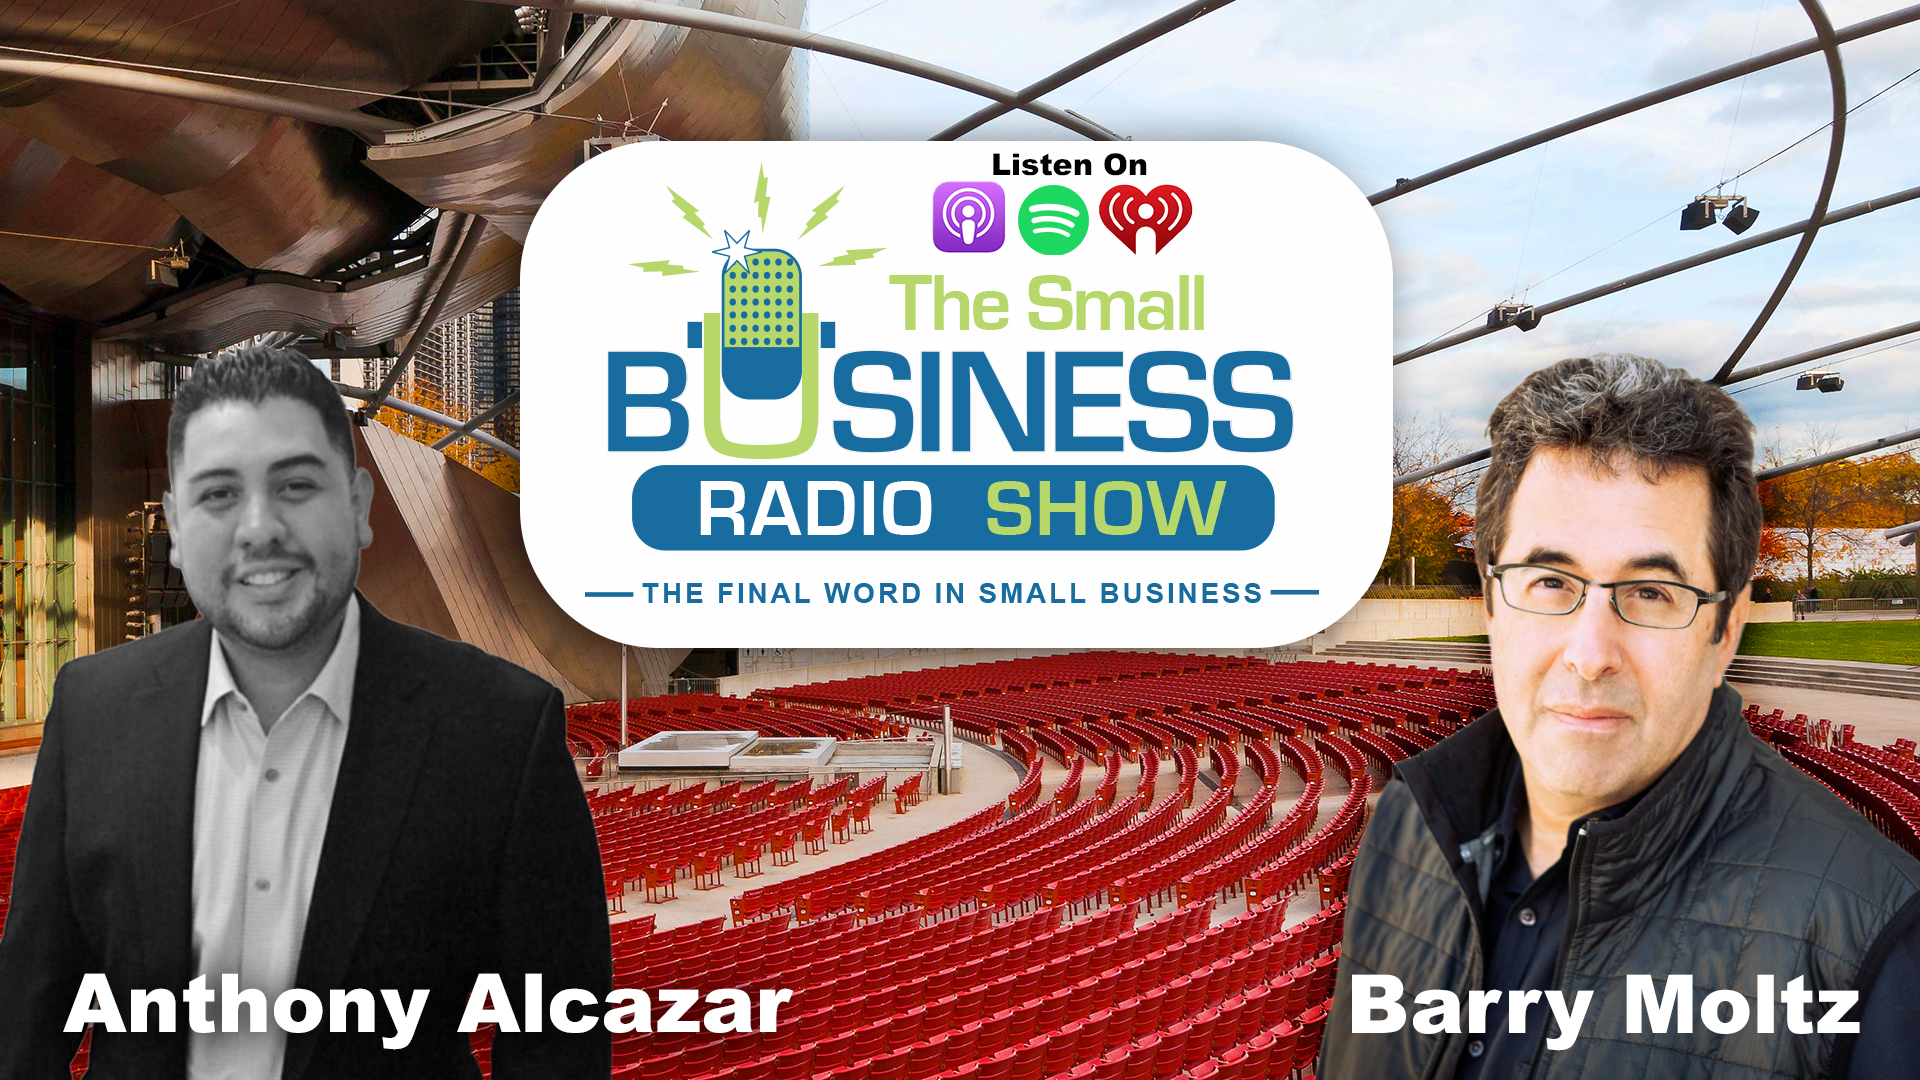 Anthony Alcazar on The Small Business Radio Show